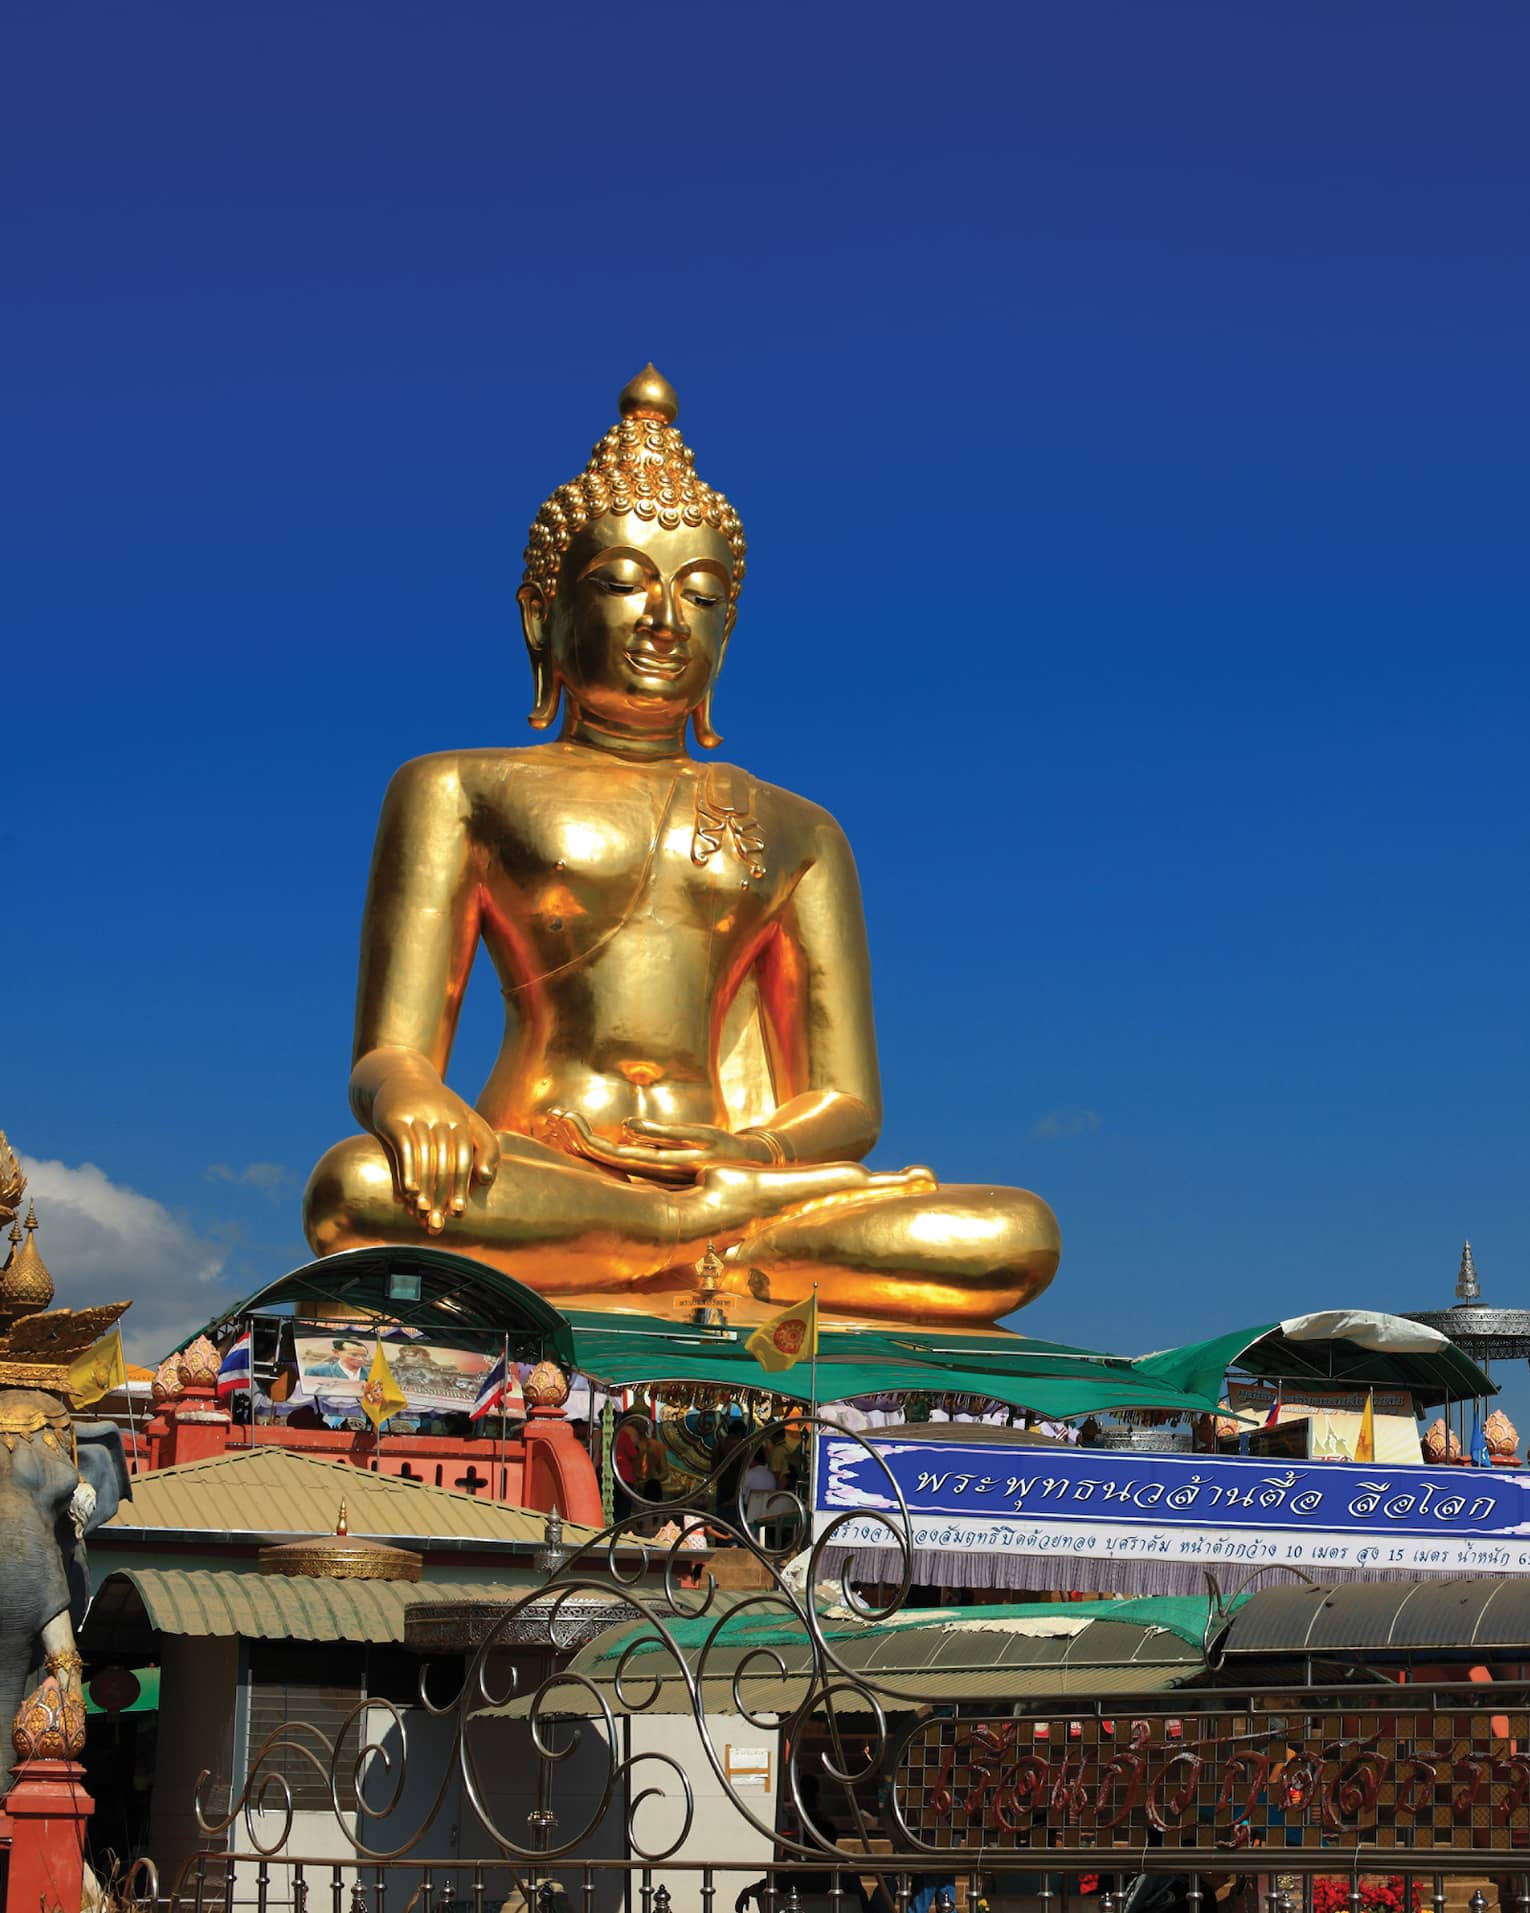 Gold Buddha statue on temple roof against a blue sky